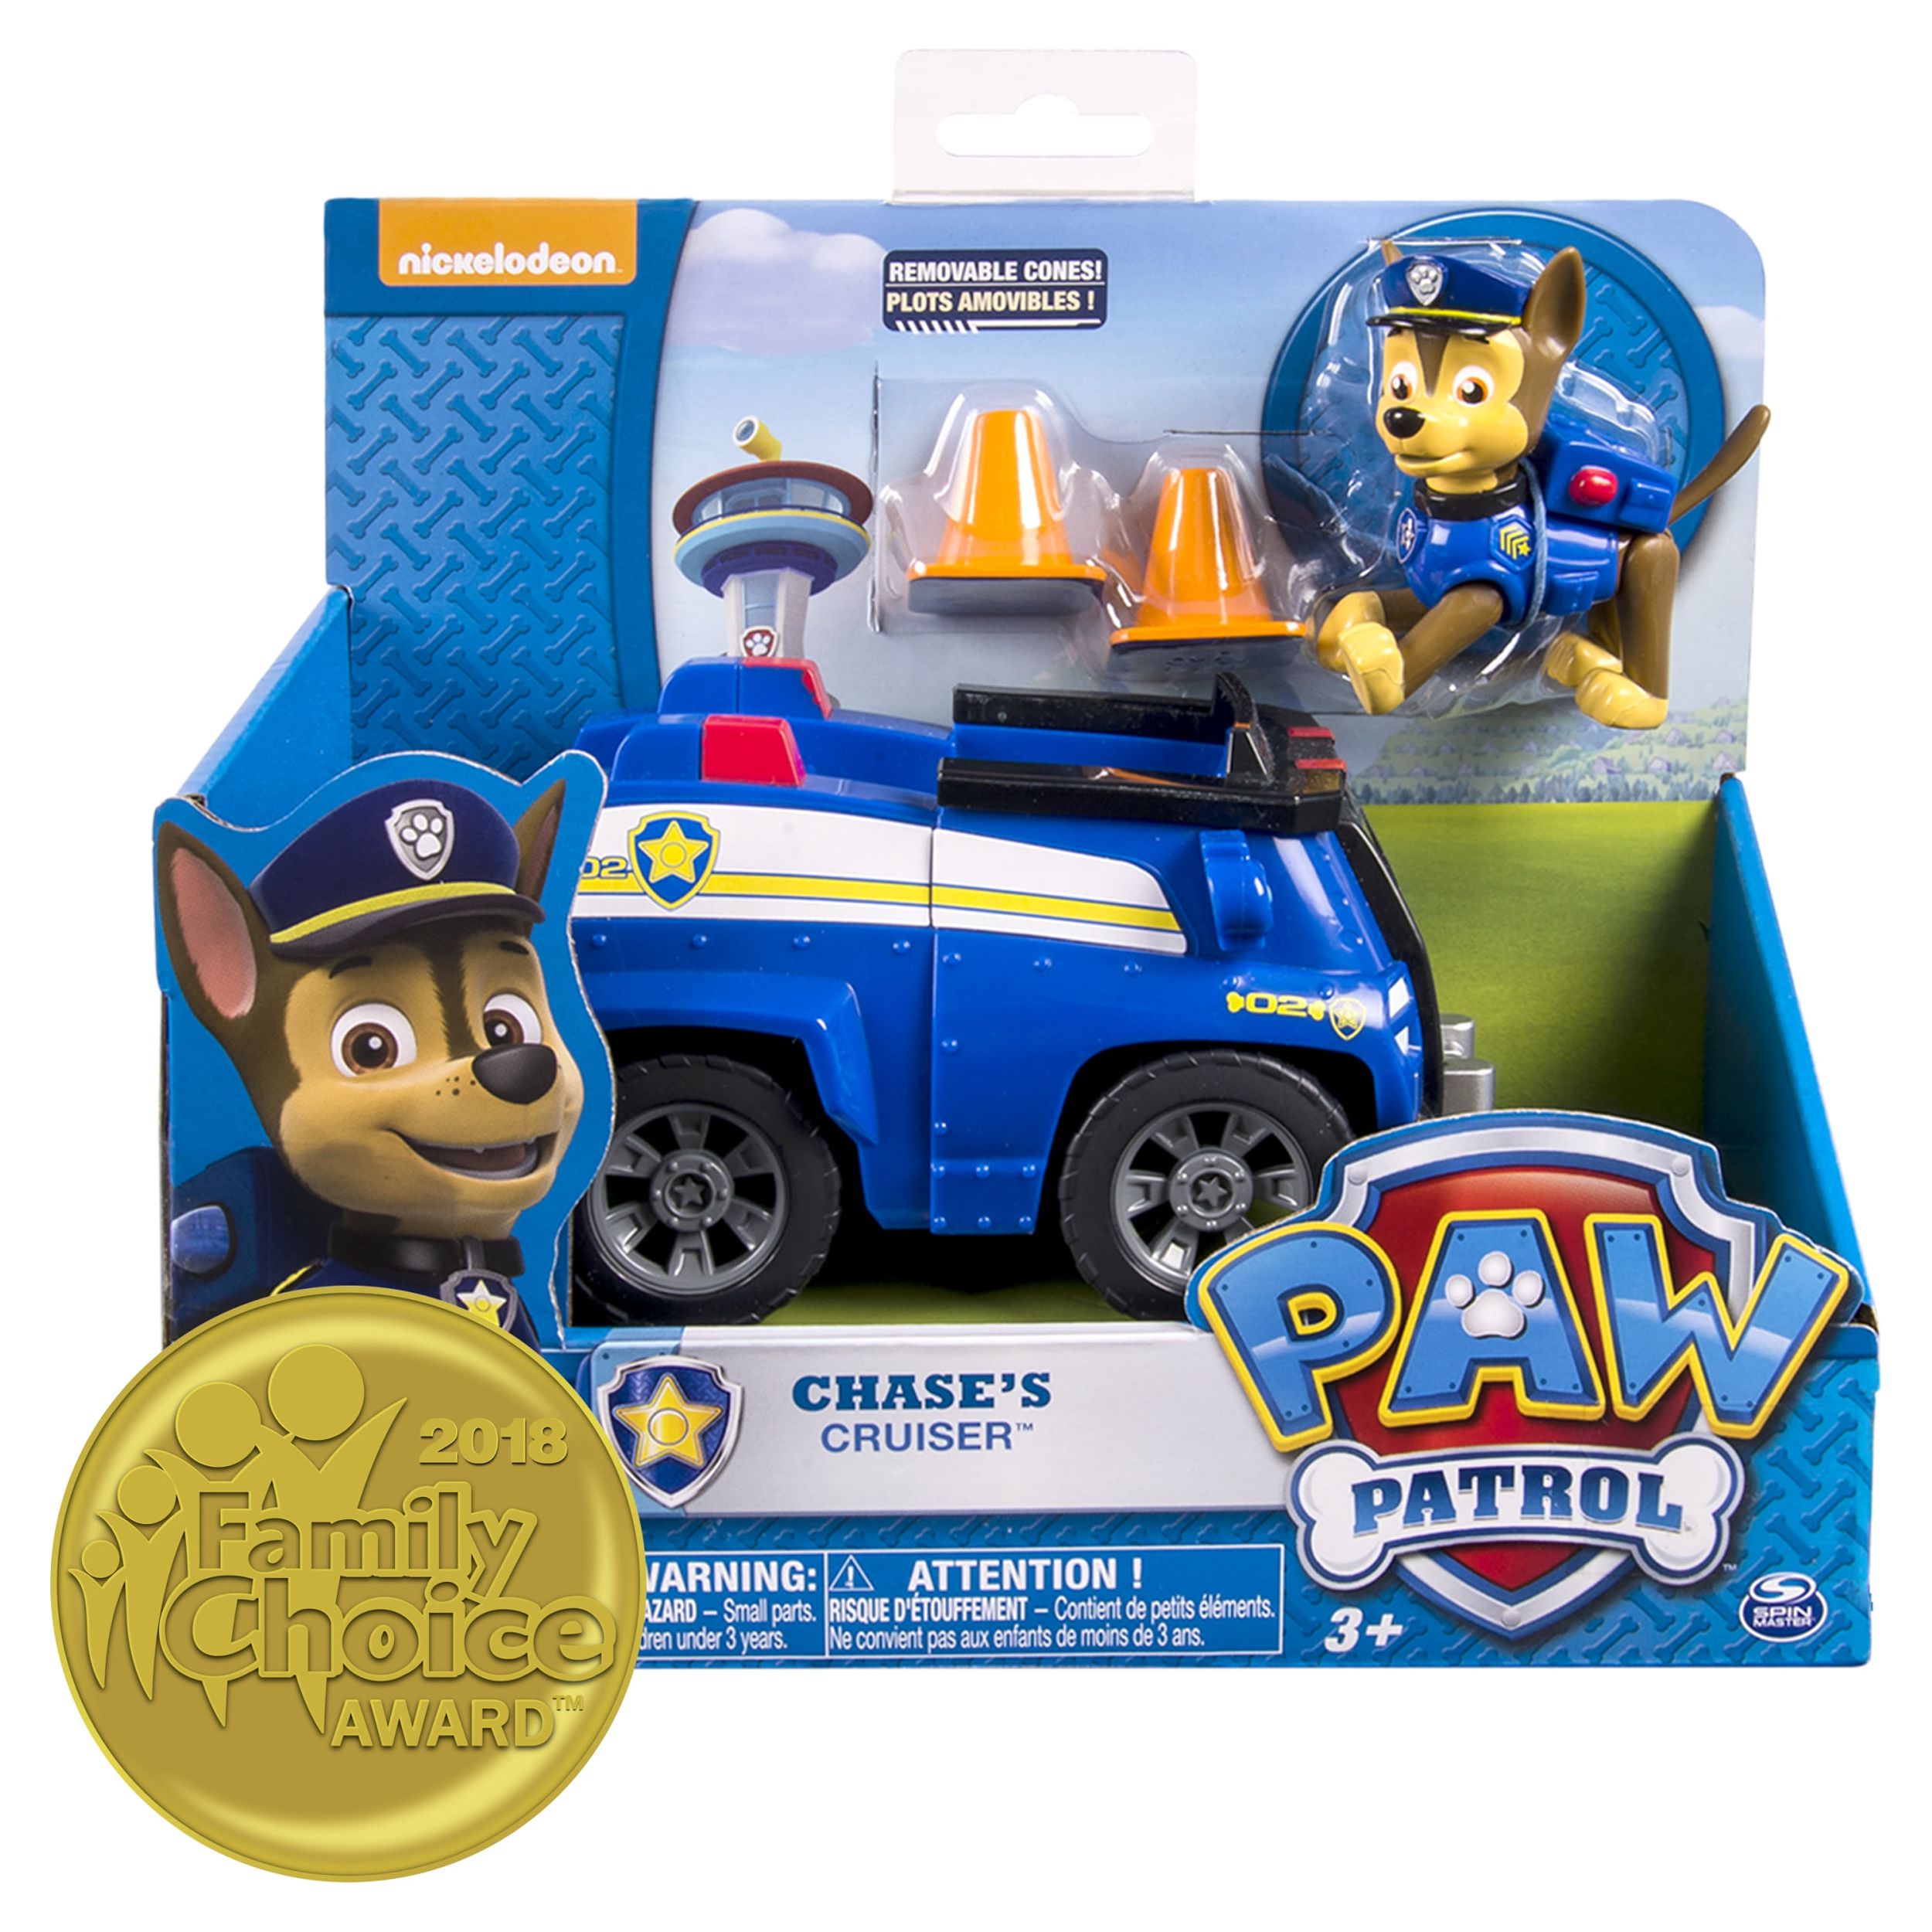 Paw Patrol Chase's Cruiser, Vehicle and Figure - image 1 of 6